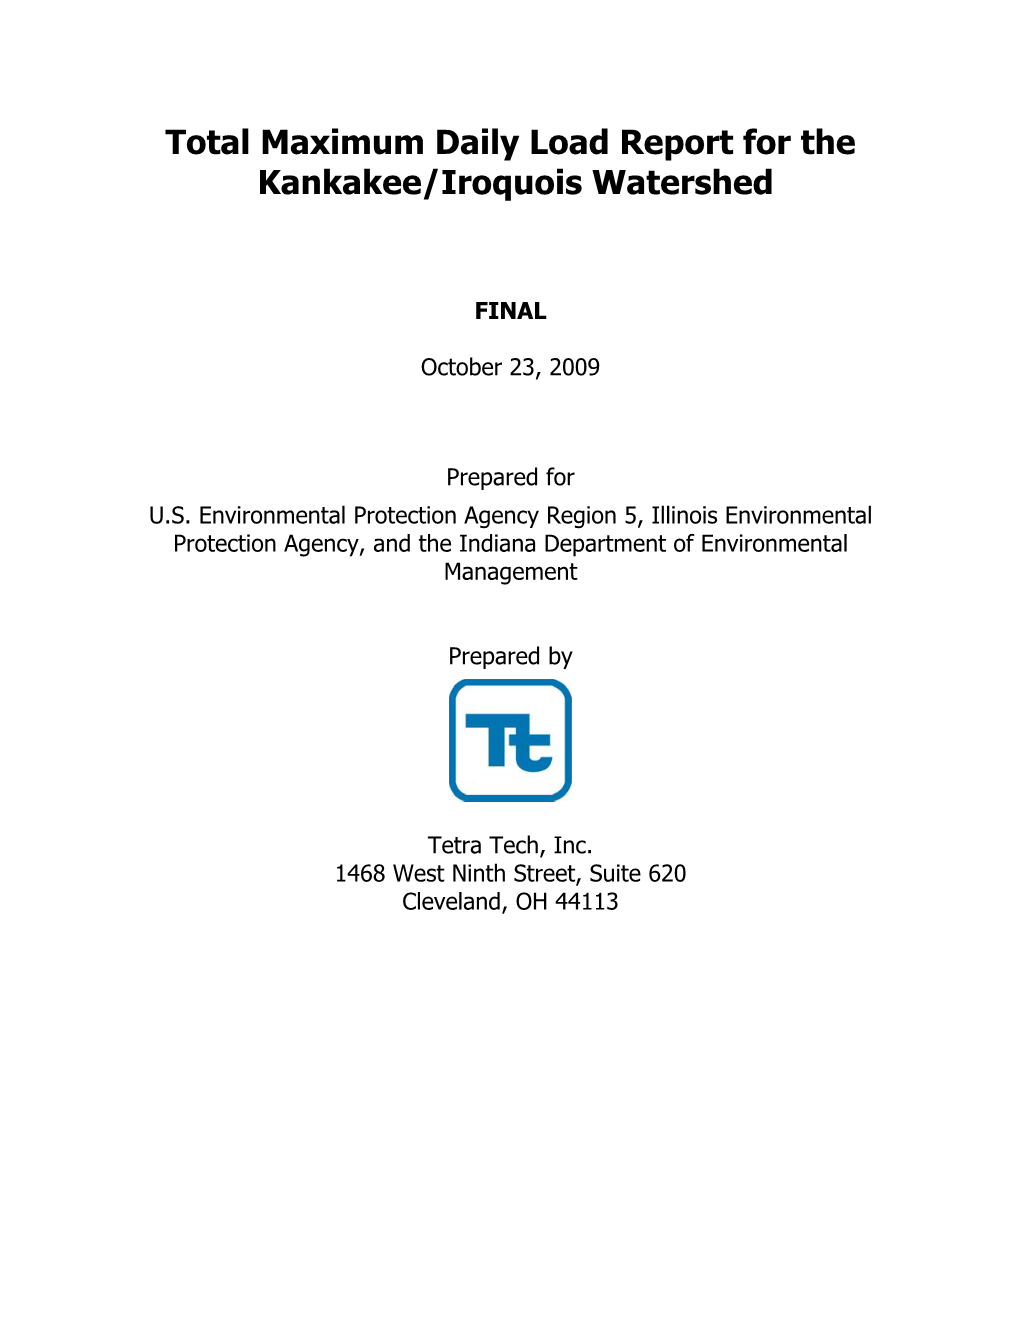 Total Maximum Daily Load Report for the Kankakee/Iroquois Watershed